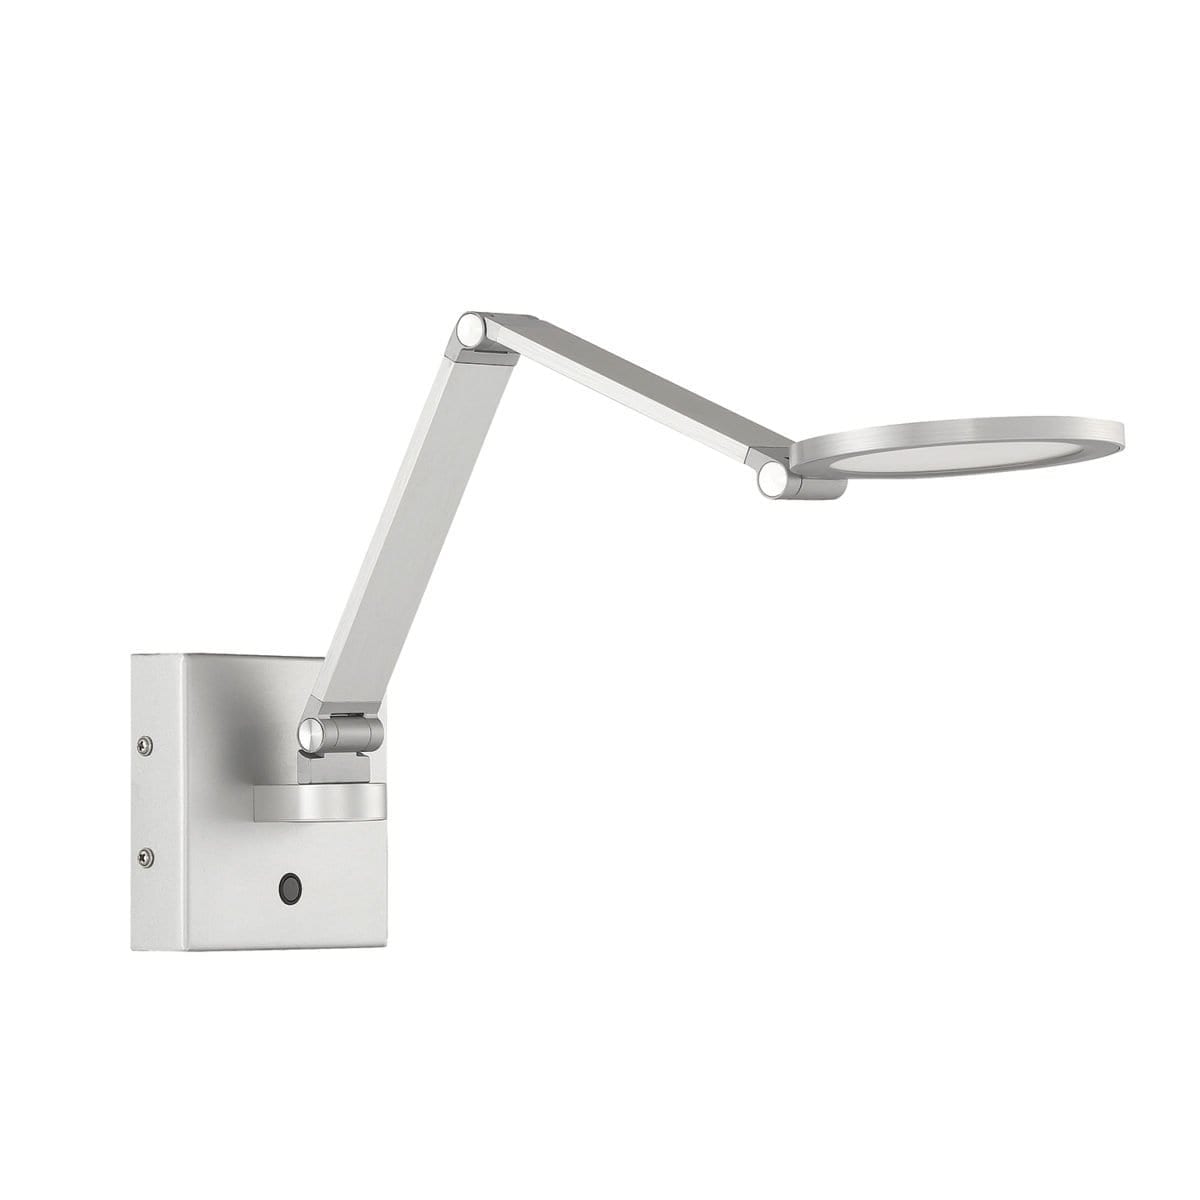 148 SA101 AL
LED Wall Swing Arm
Available in Aluminum or Black
Regular Price $381.99
Sale Price $267.99